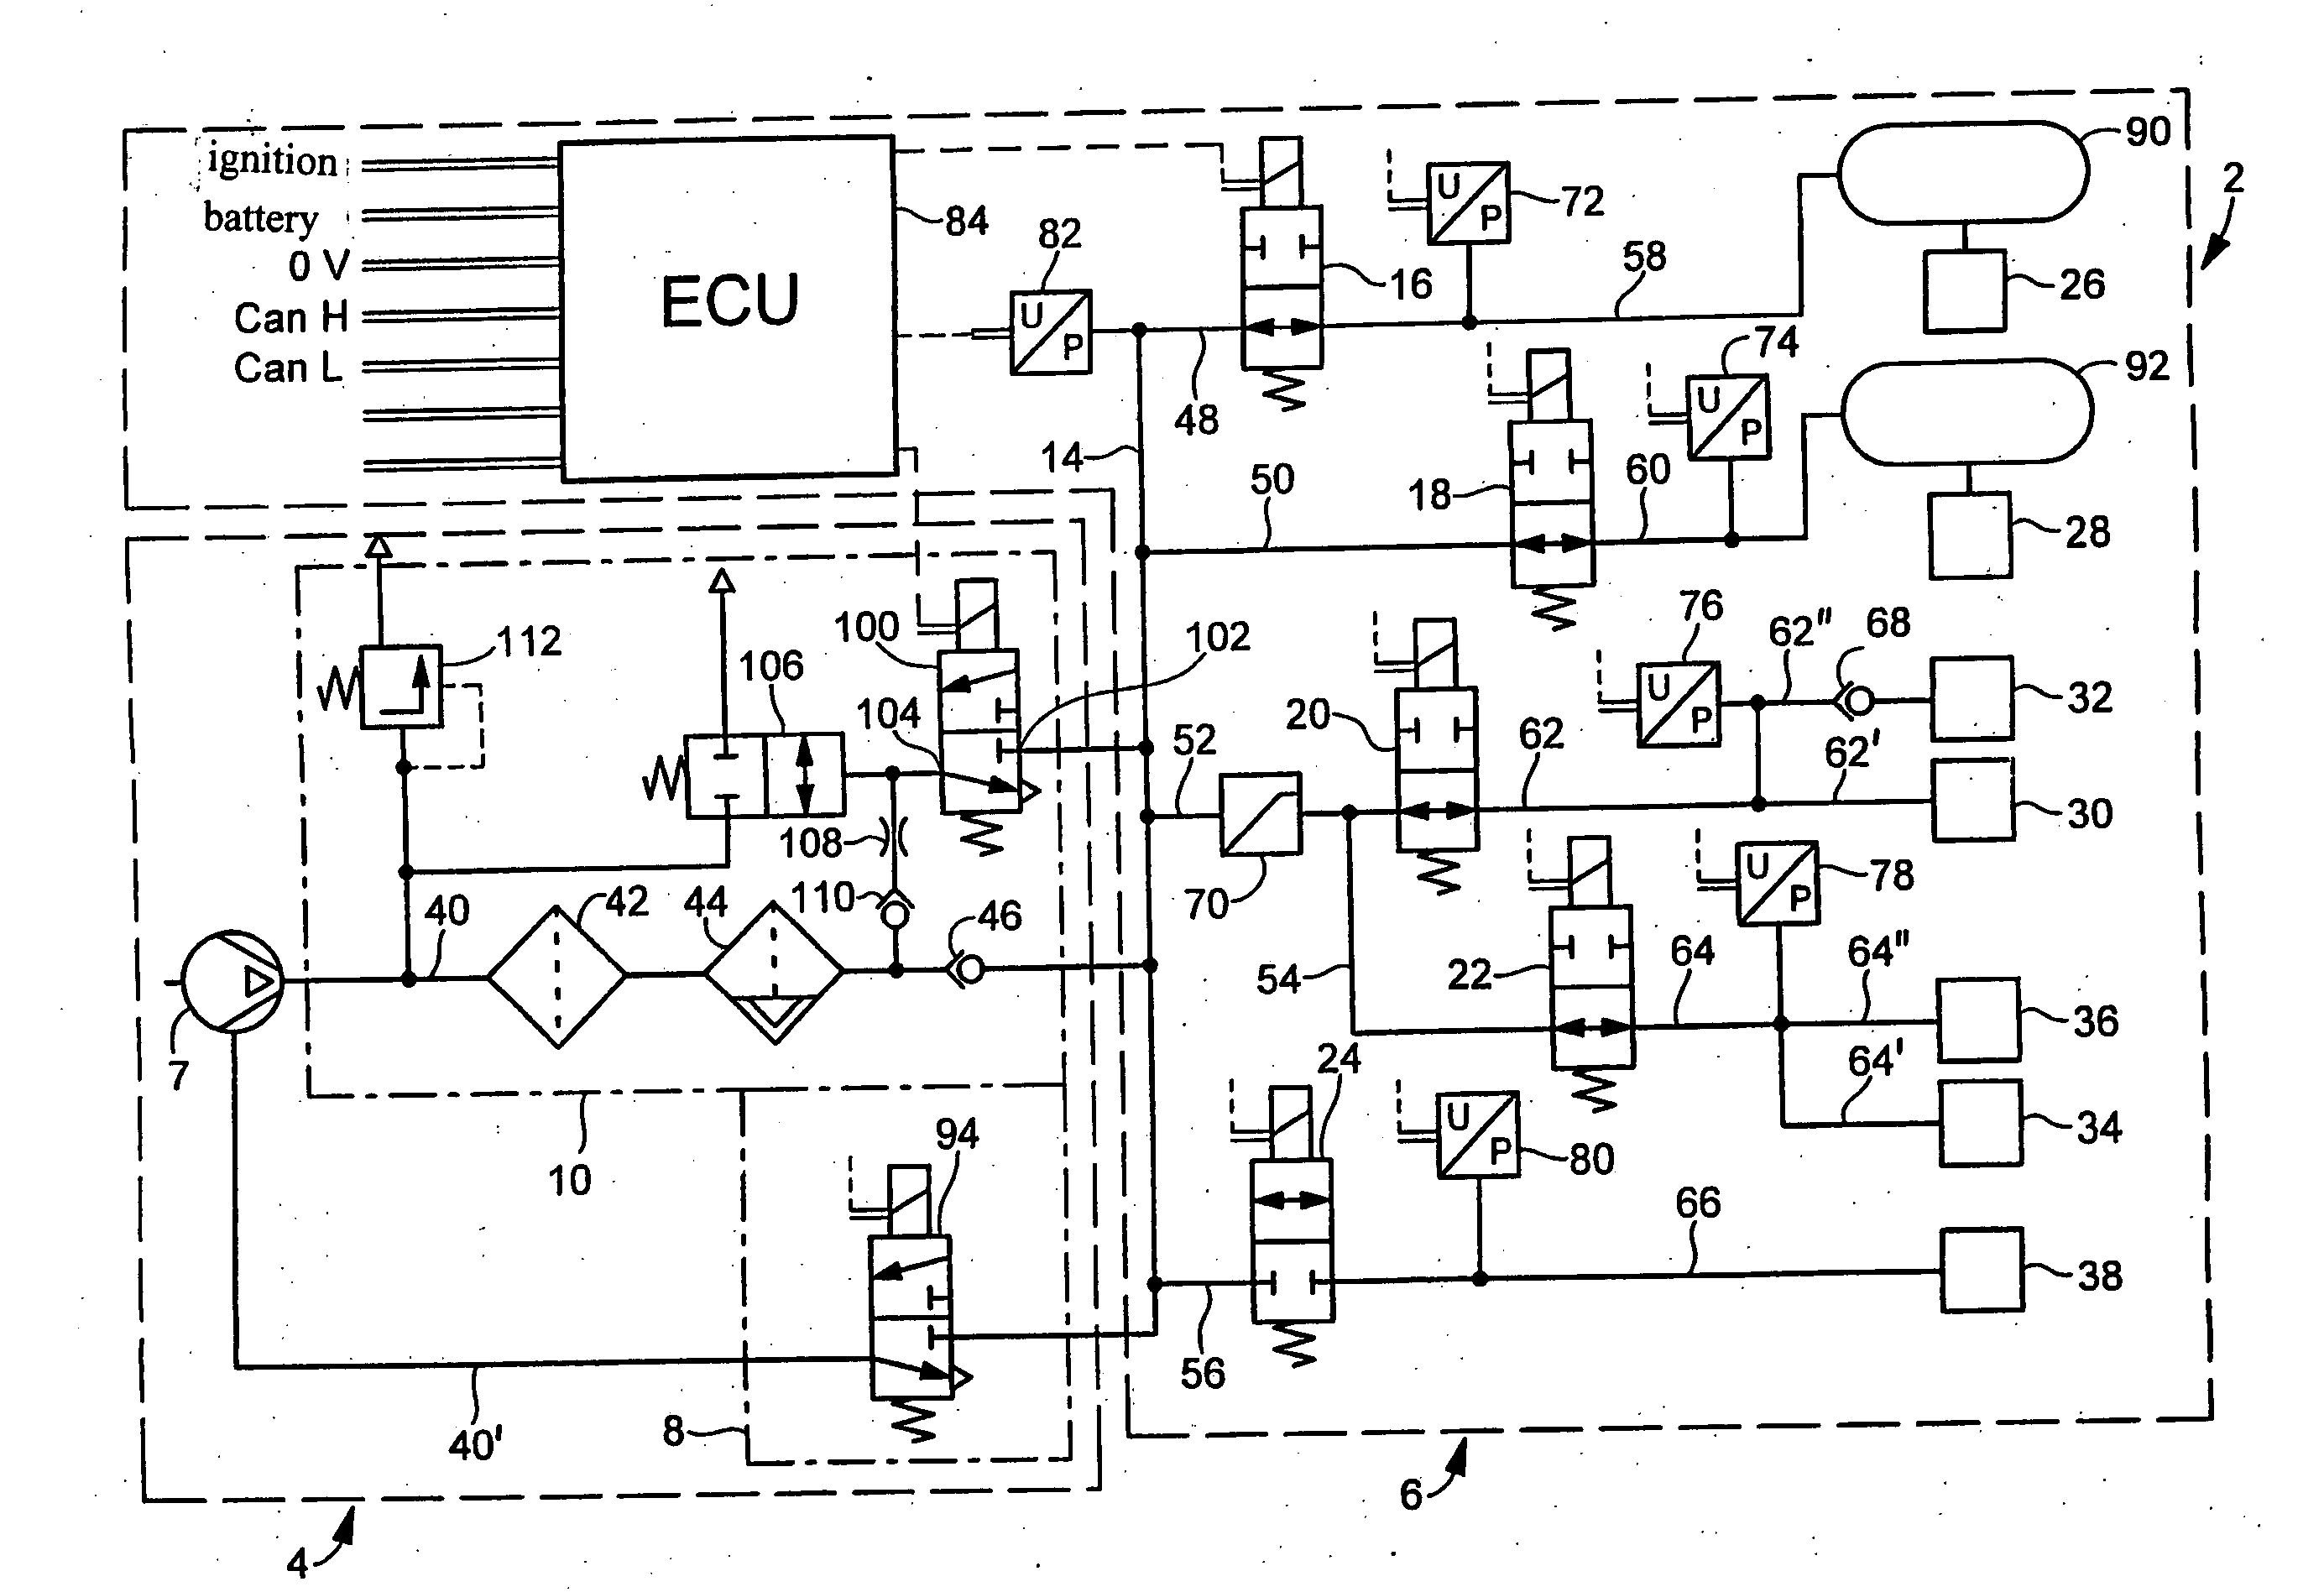 Electronic Compressed-Air System